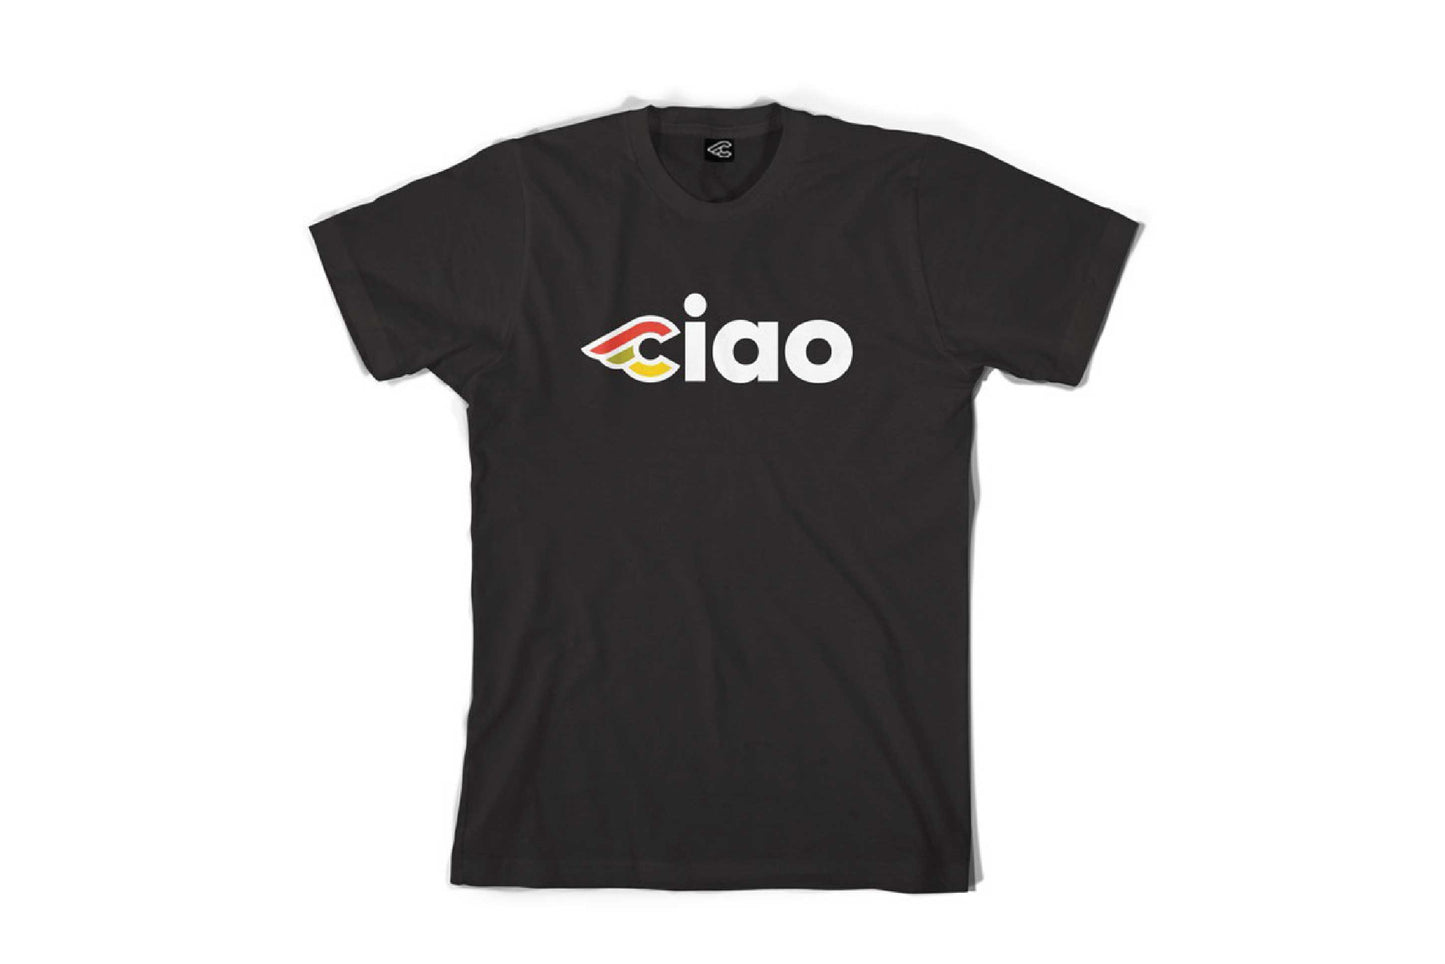 CINELLI Ciao Black T Shirt - FISHTAIL CYCLERY